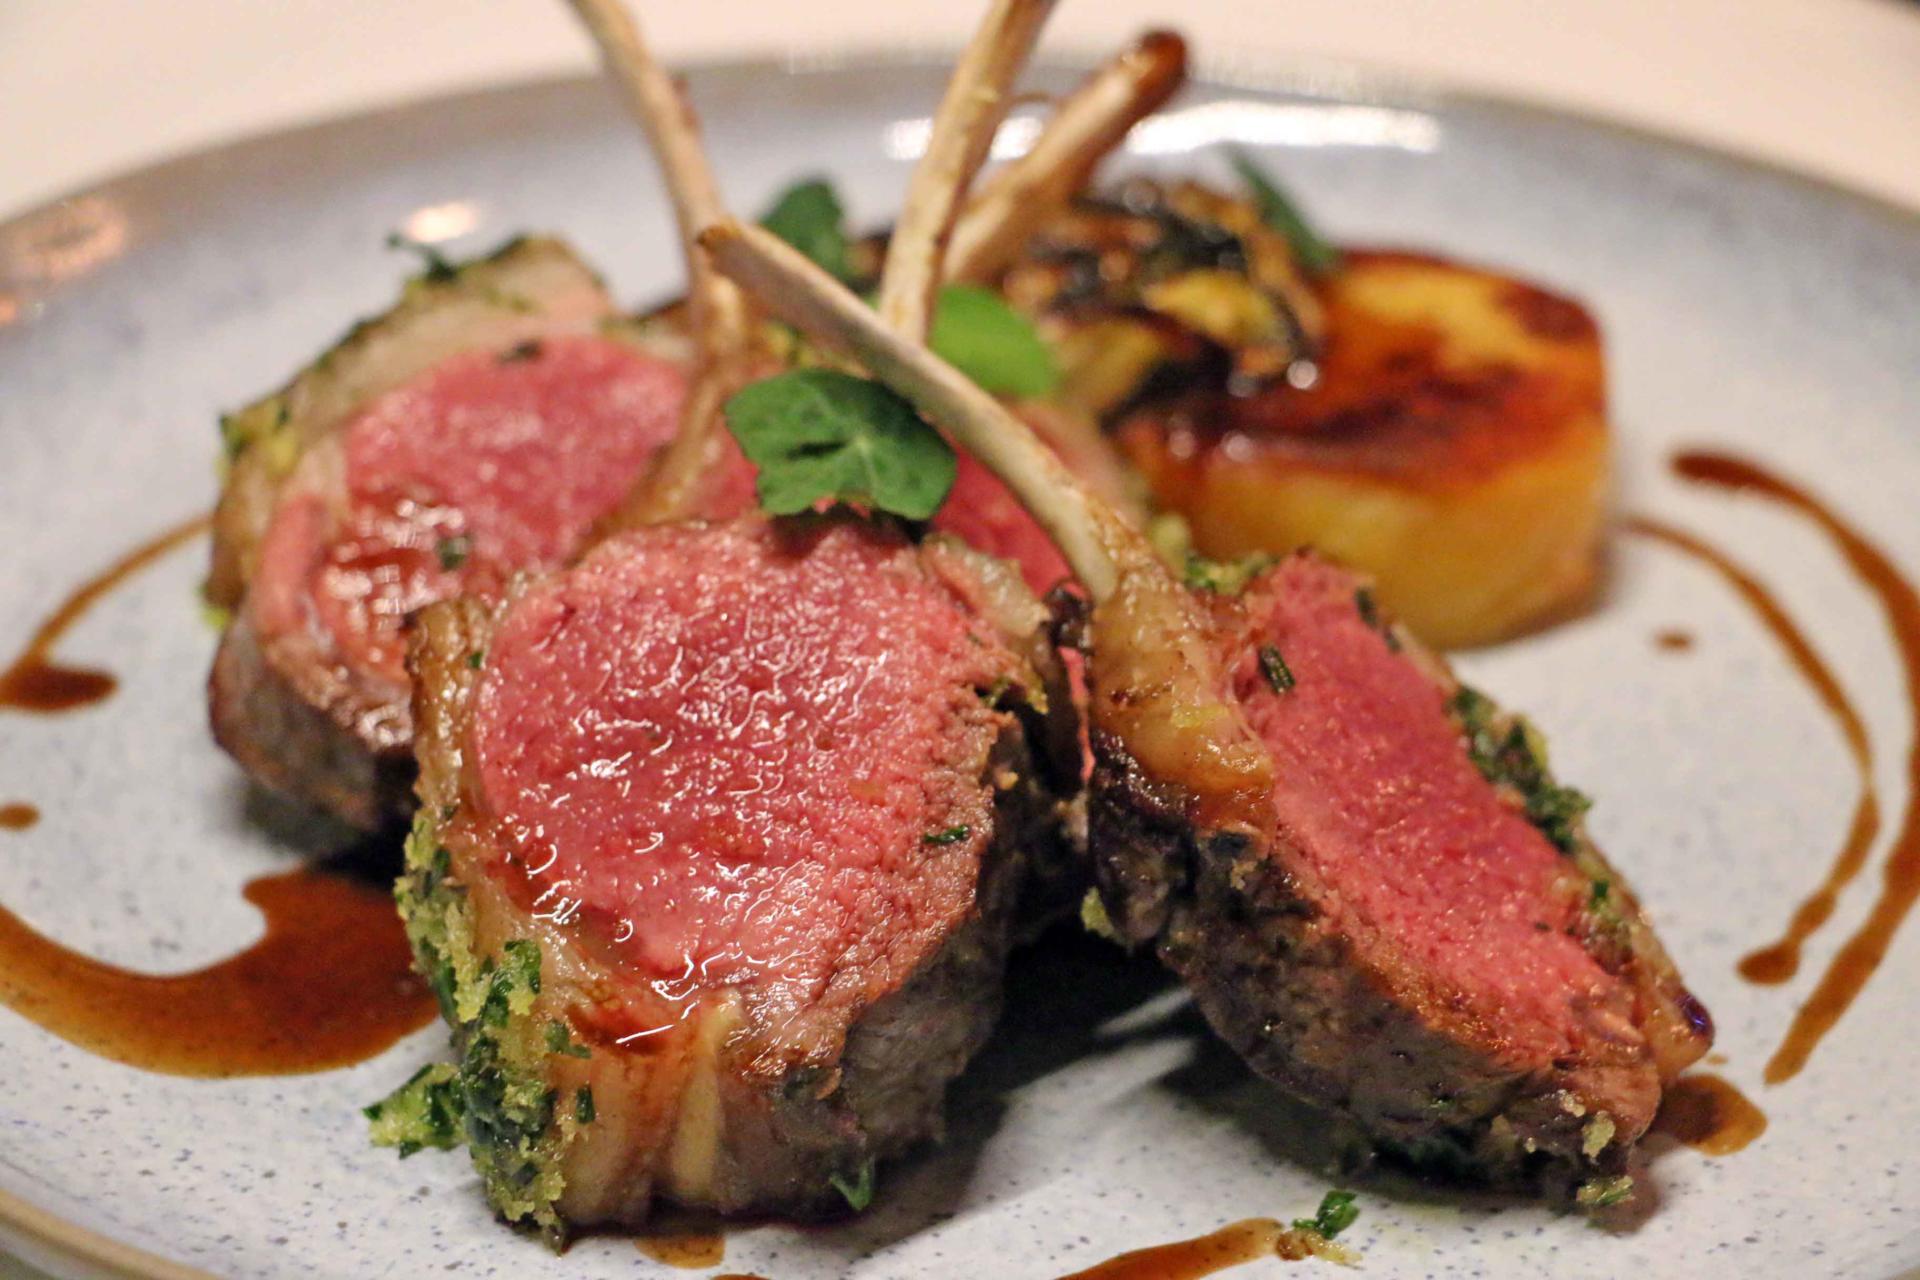 Northbank Restaurant Review: Fresh & Seasonal Cooking in the City of London